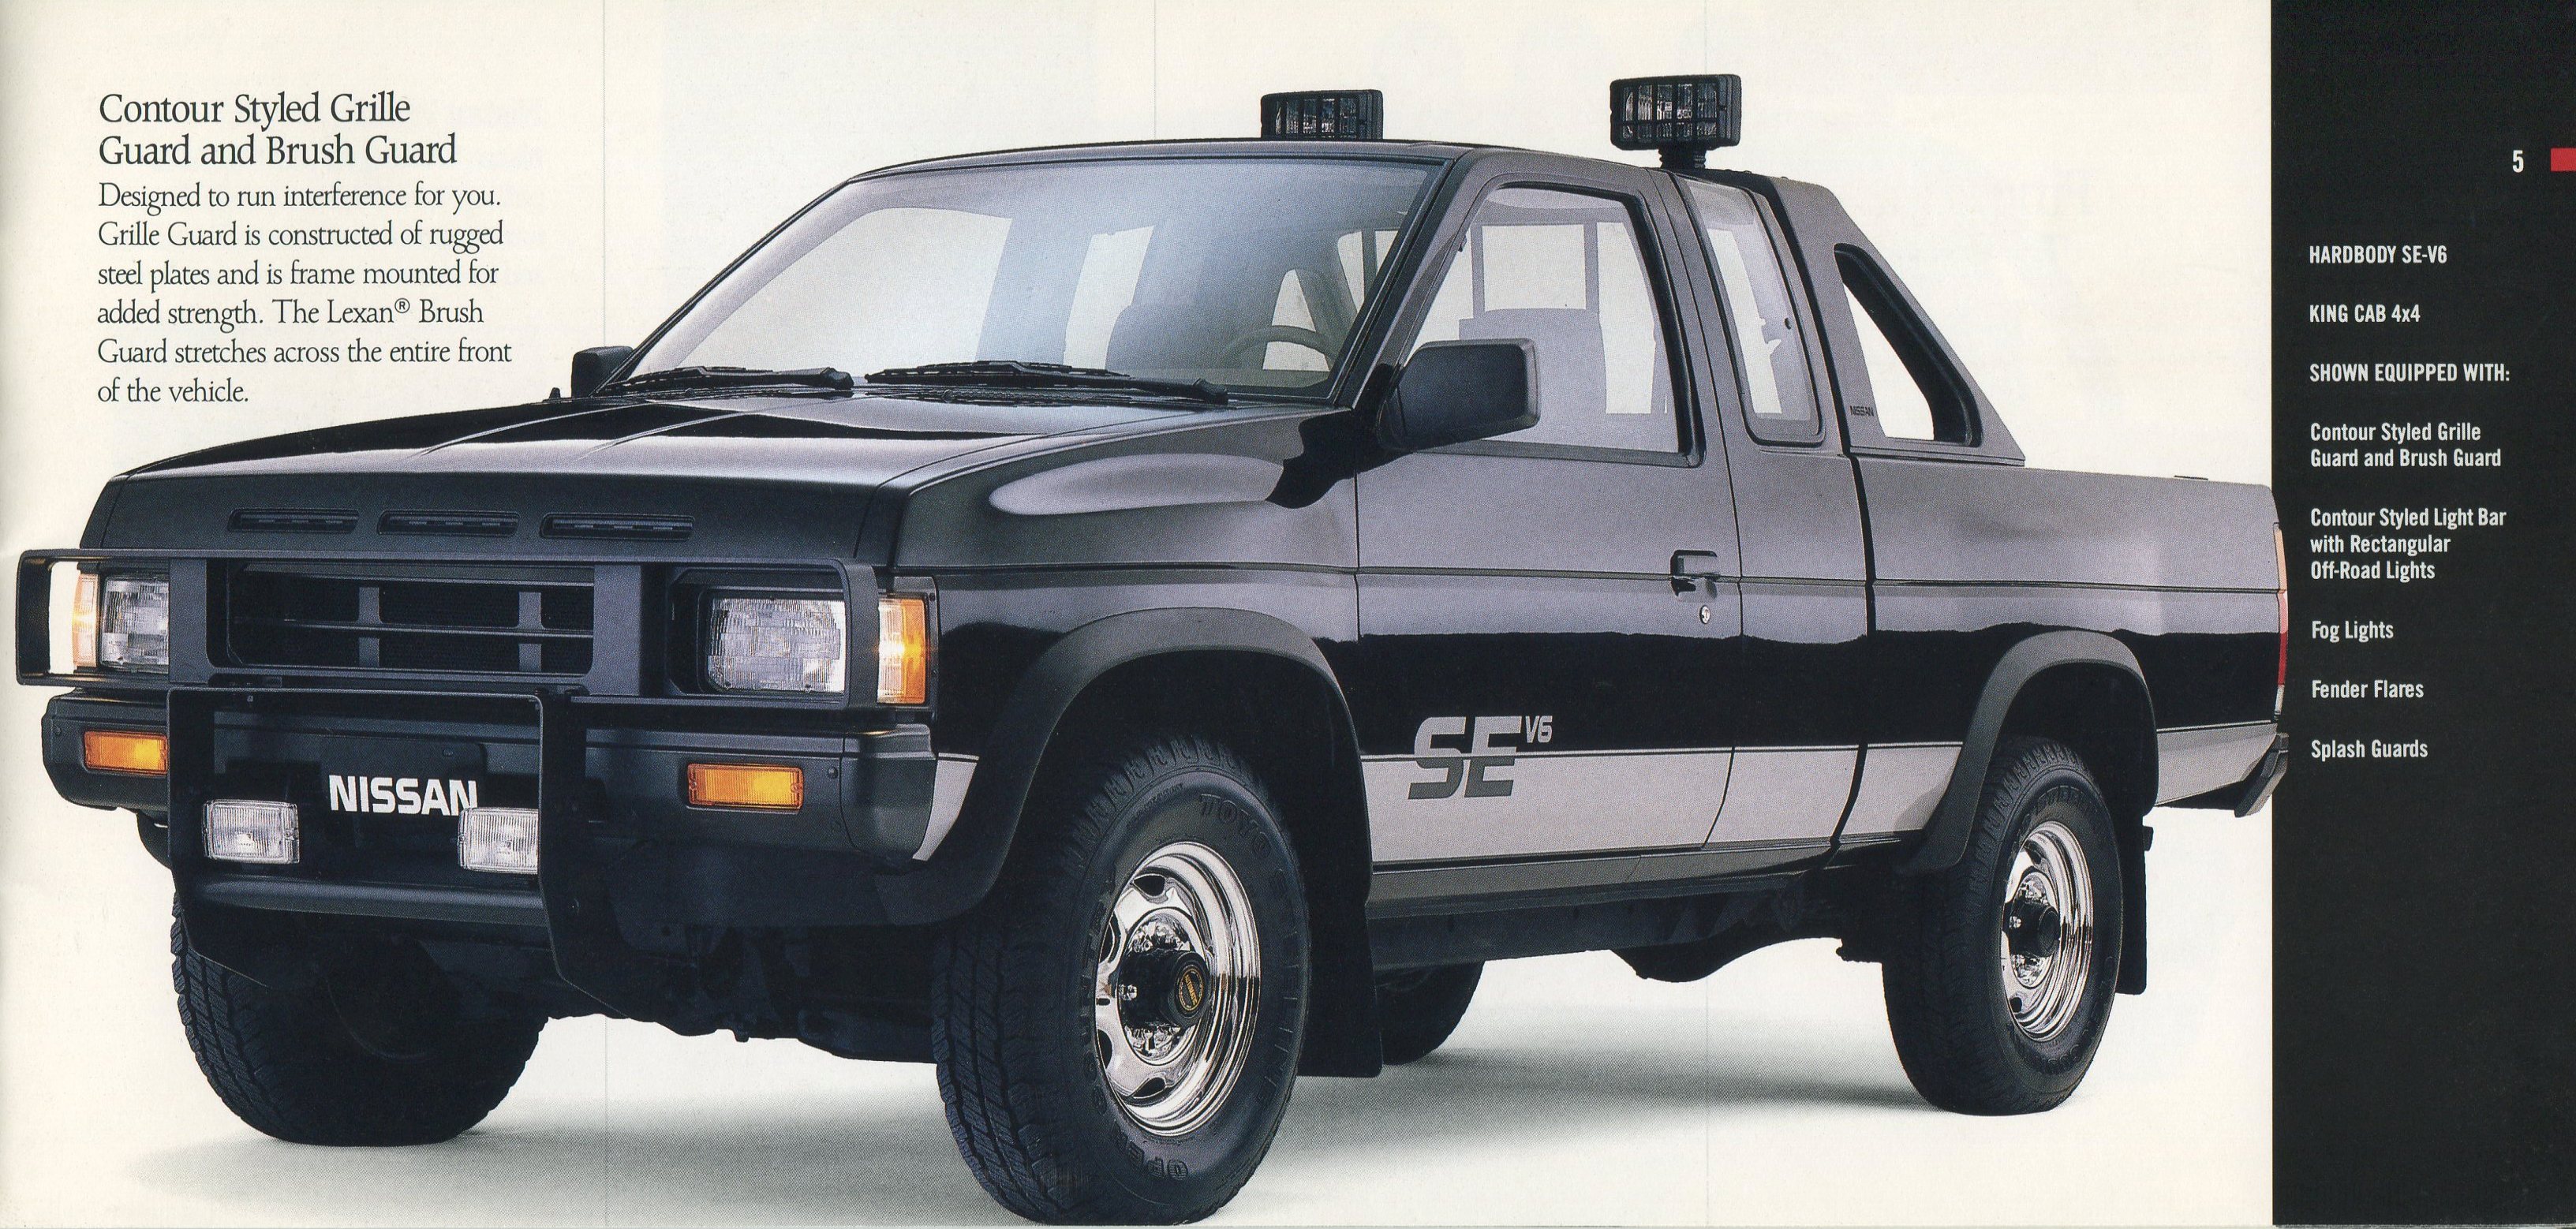 Nissan d21 pickup 1988 review #7